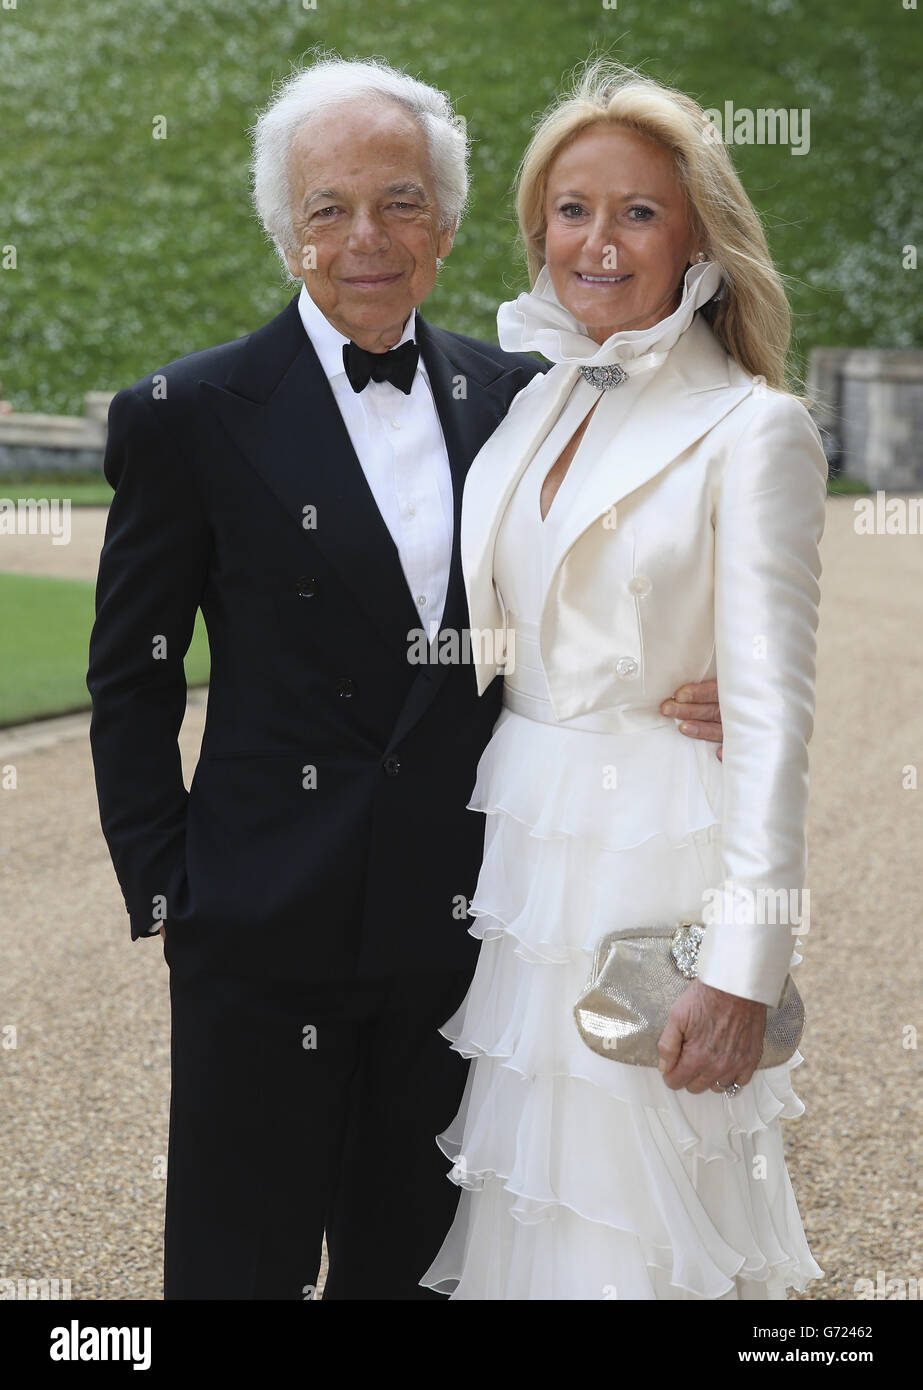 Ralph Lauren and Ricky Anne Loew-Beer arrive for a dinner to celebrate the  work of The Royal Marsden hosted by the Duke of Cambridge at Windsor Castle  Stock Photo - Alamy